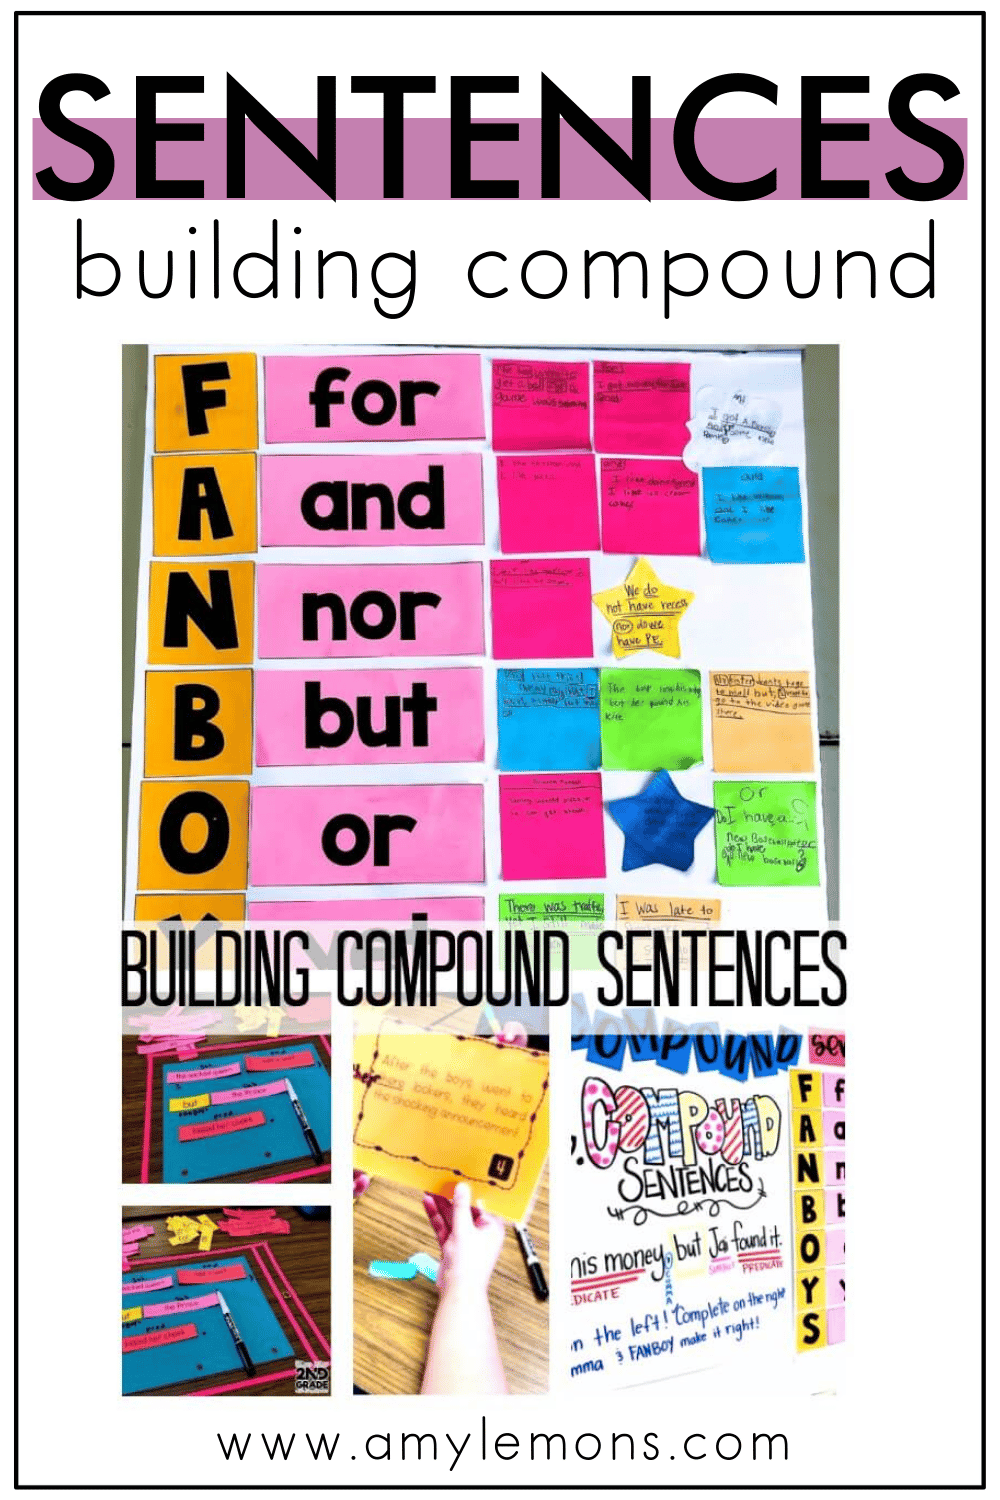 Compound Sentence Writing using FANBOYS (Coordinating Conjunctions) POSTER